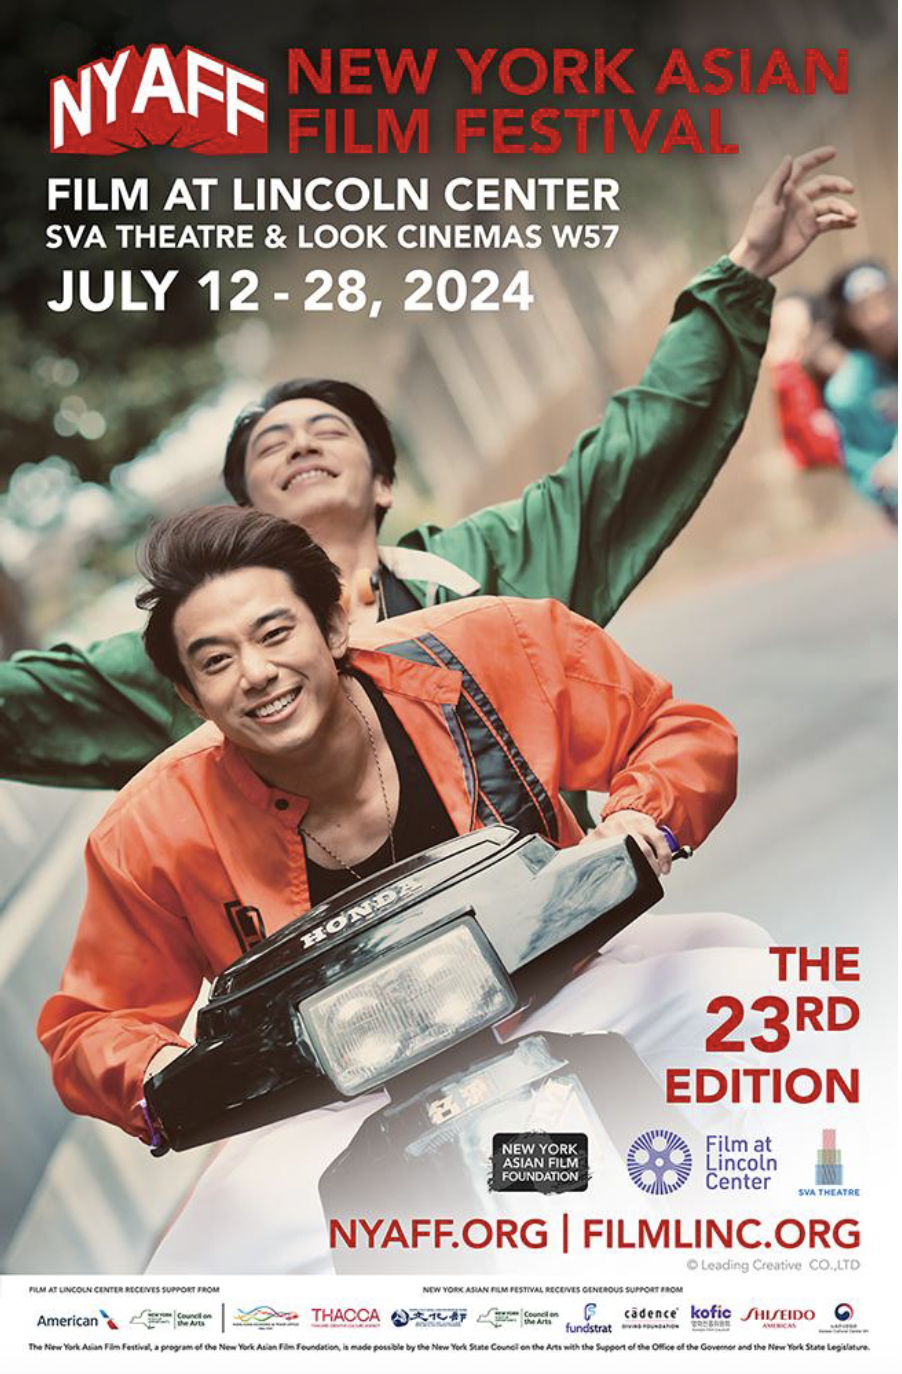 New York Asian Film Foundation and Film at Lincoln Center Announce First Highlights from 23rd Edition of NYAFF post image